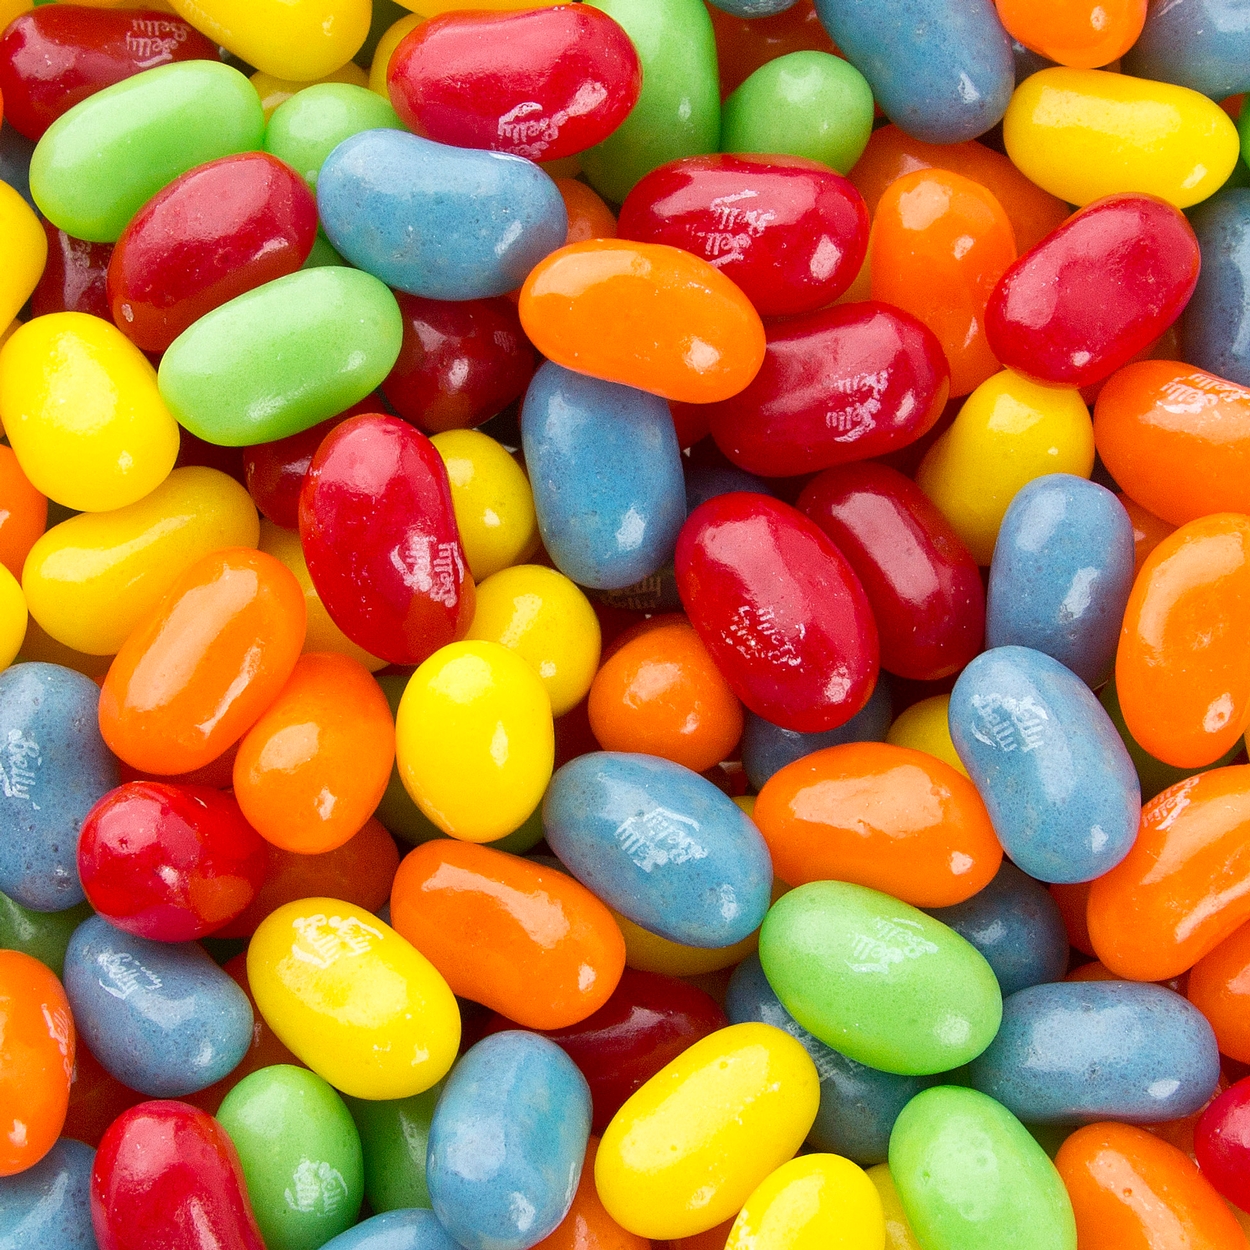 Build Your Own Jelly Belly Bag 1 lb